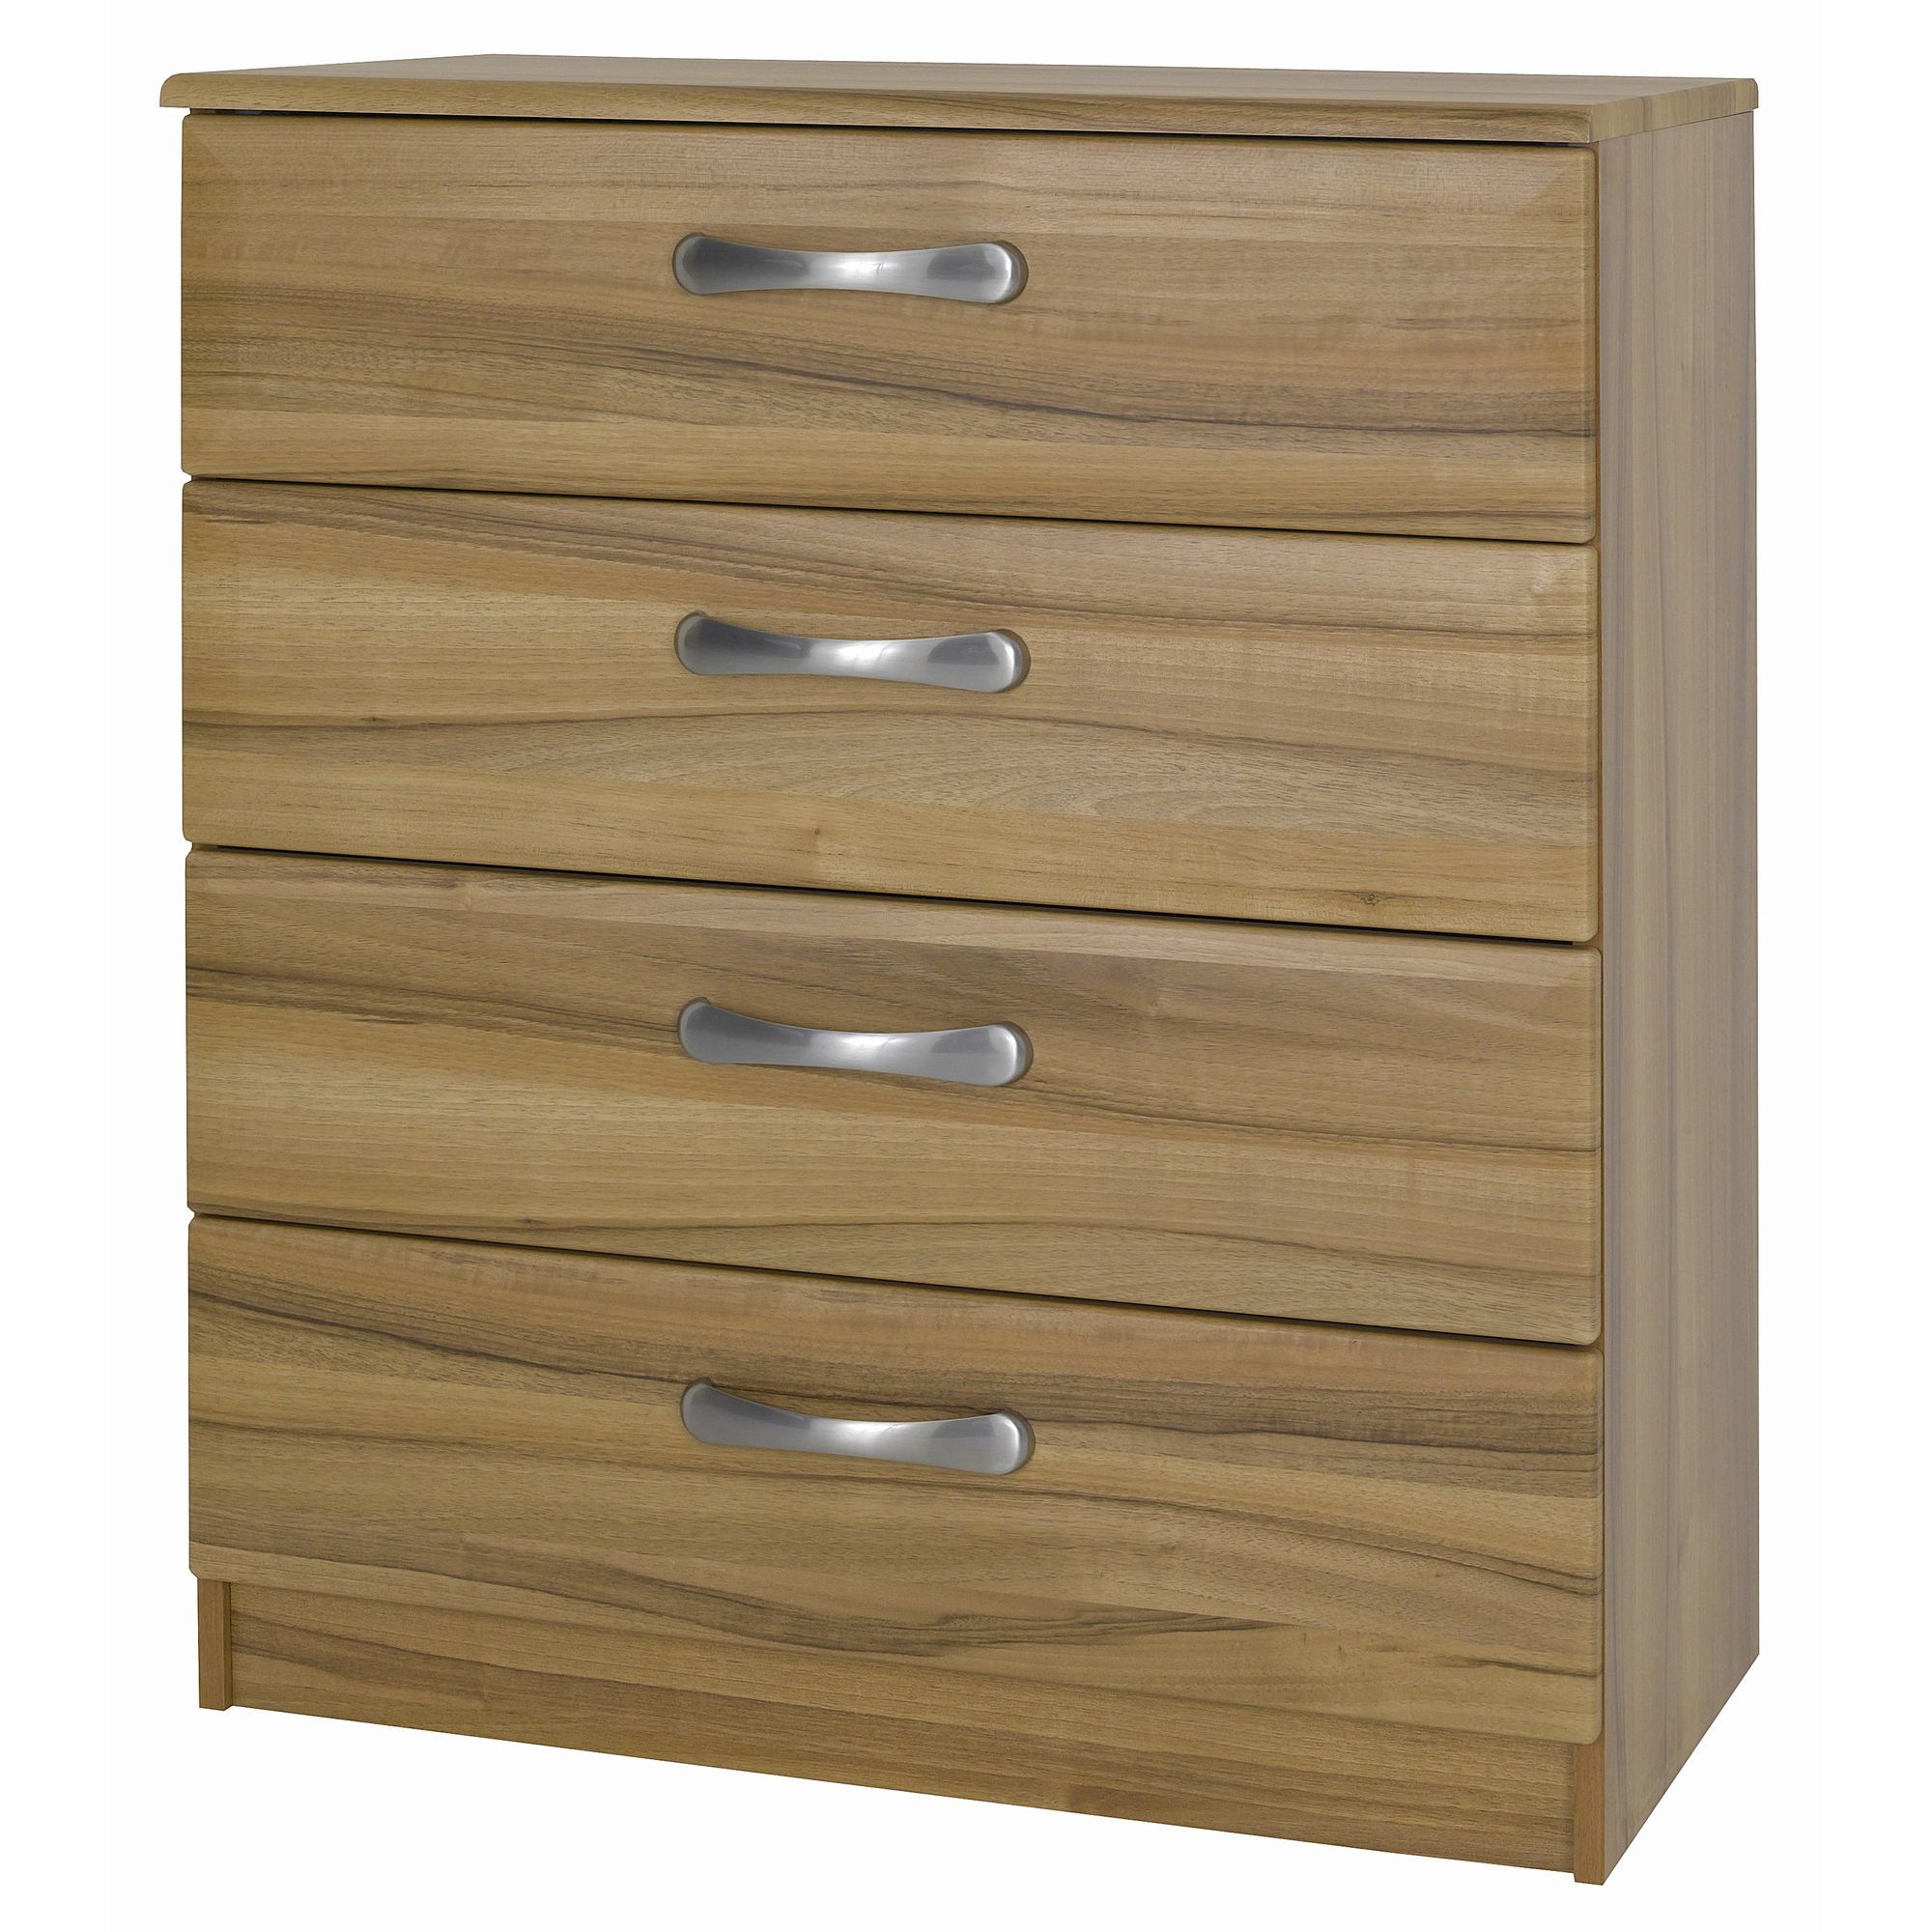 Alto Furniture Visualise Tipolo 4 Drawer Chest at Tesco Direct